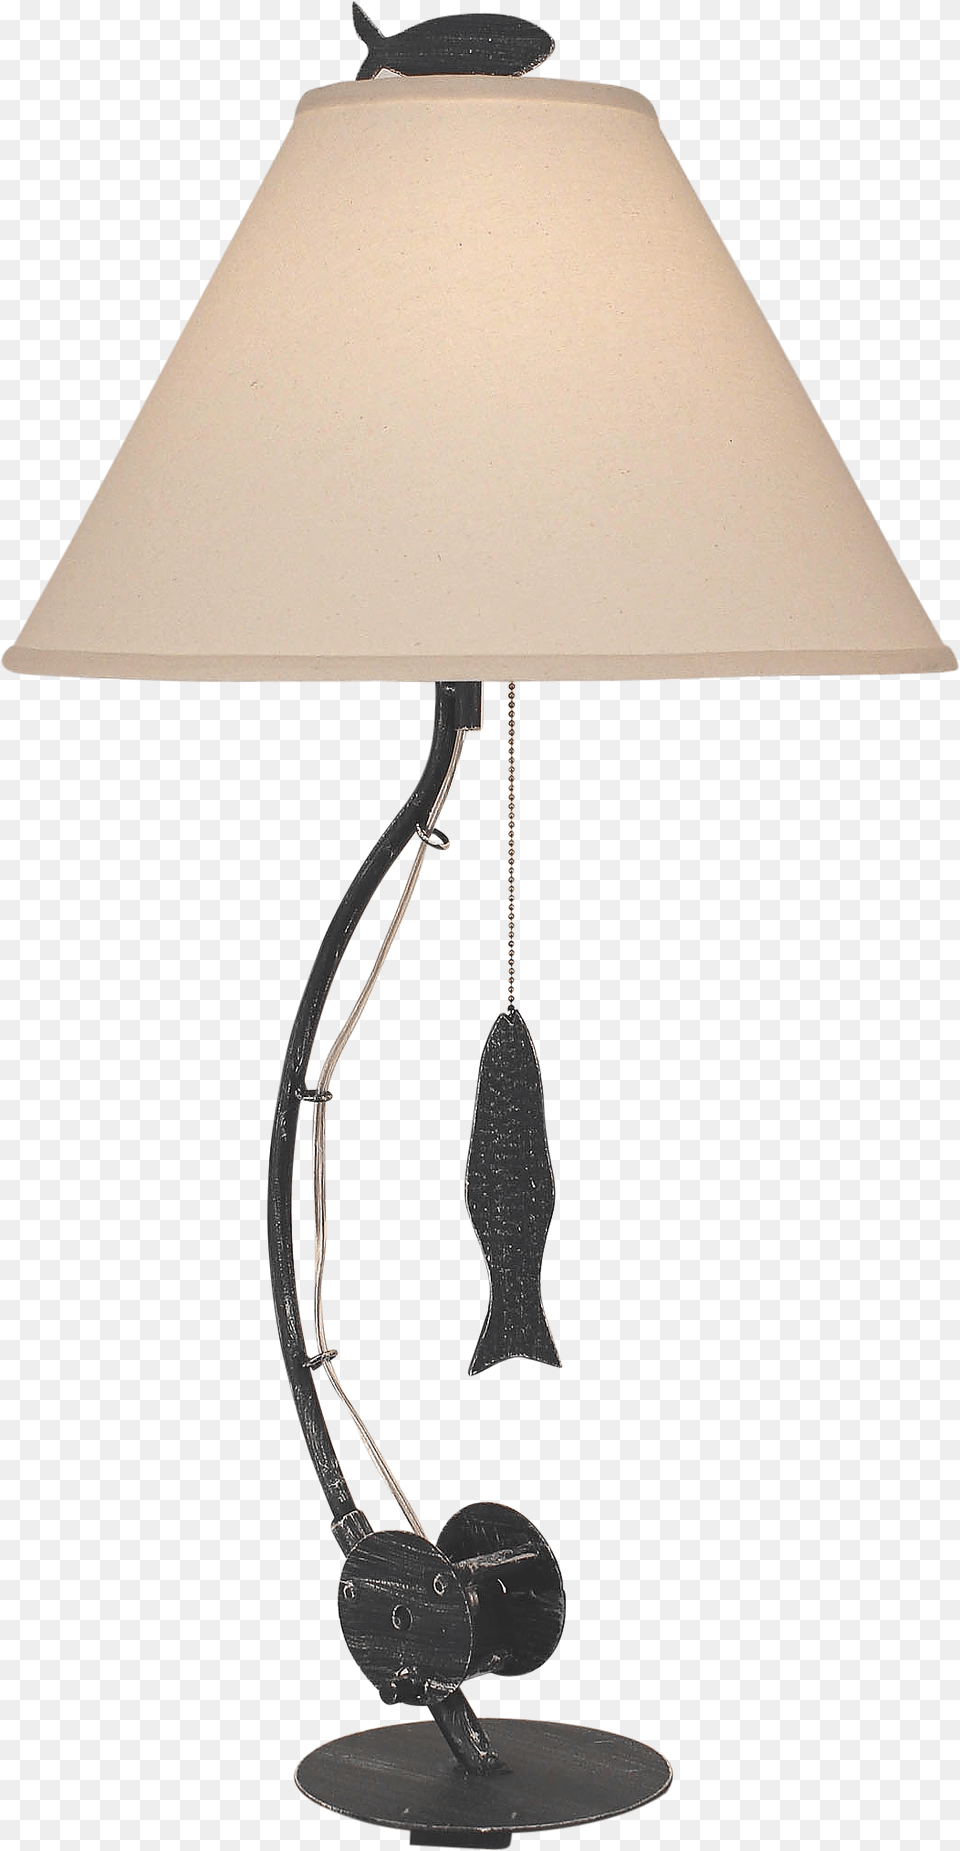 Weathered Navy Sea Fishing Pole Table Lamp Lampshade, Table Lamp Png Image